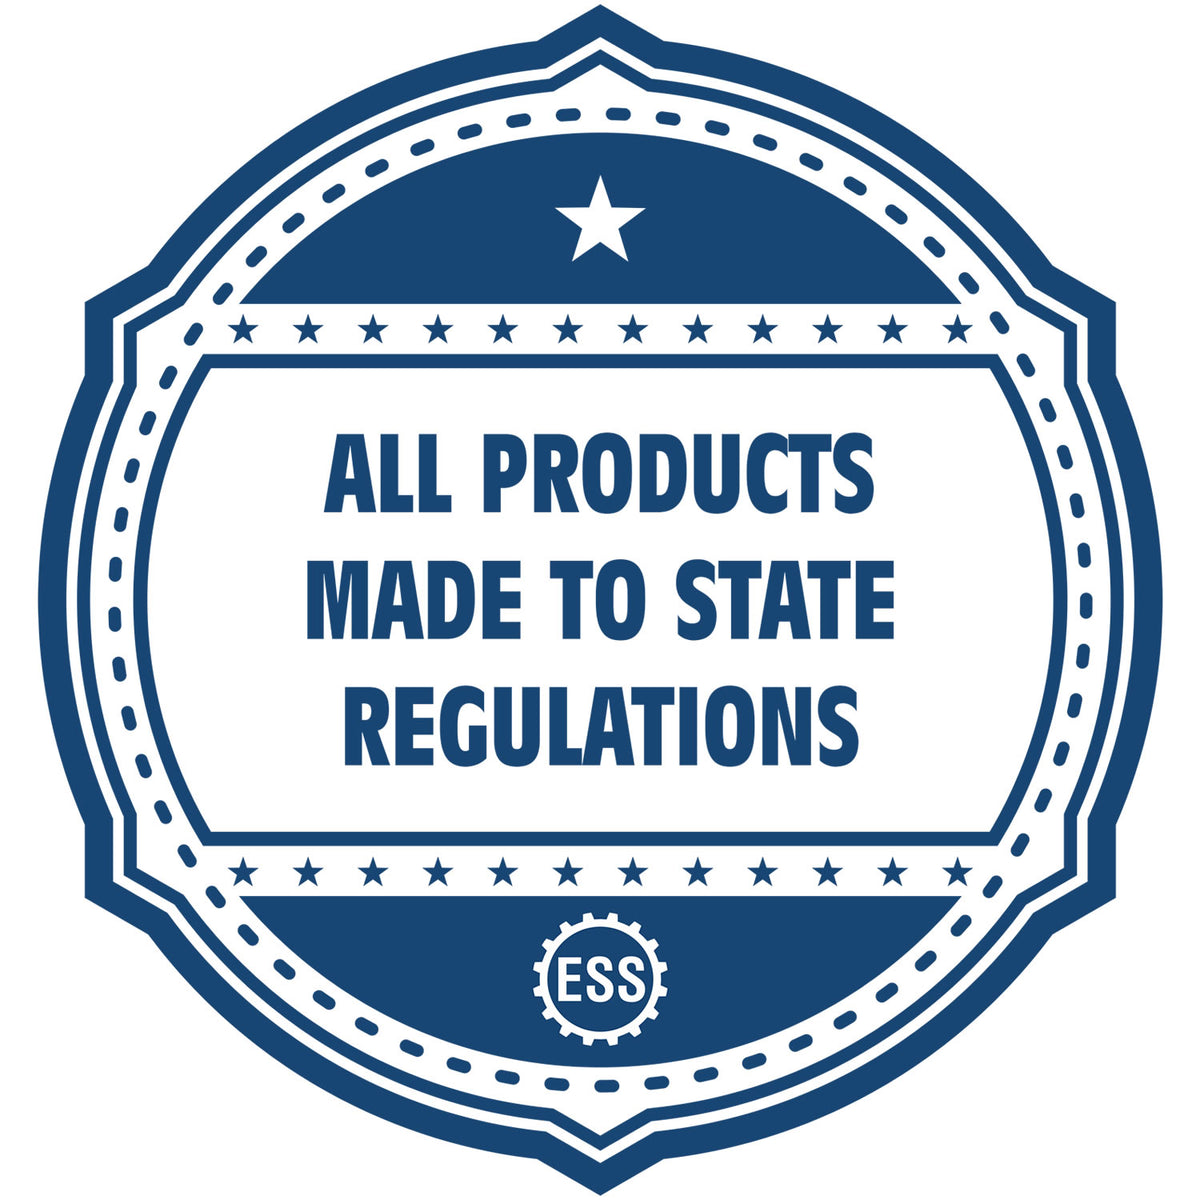 An icon or badge element for the State of South Carolina Soft Land Surveyor Embossing Seal showing that this product is made in compliance with state regulations.